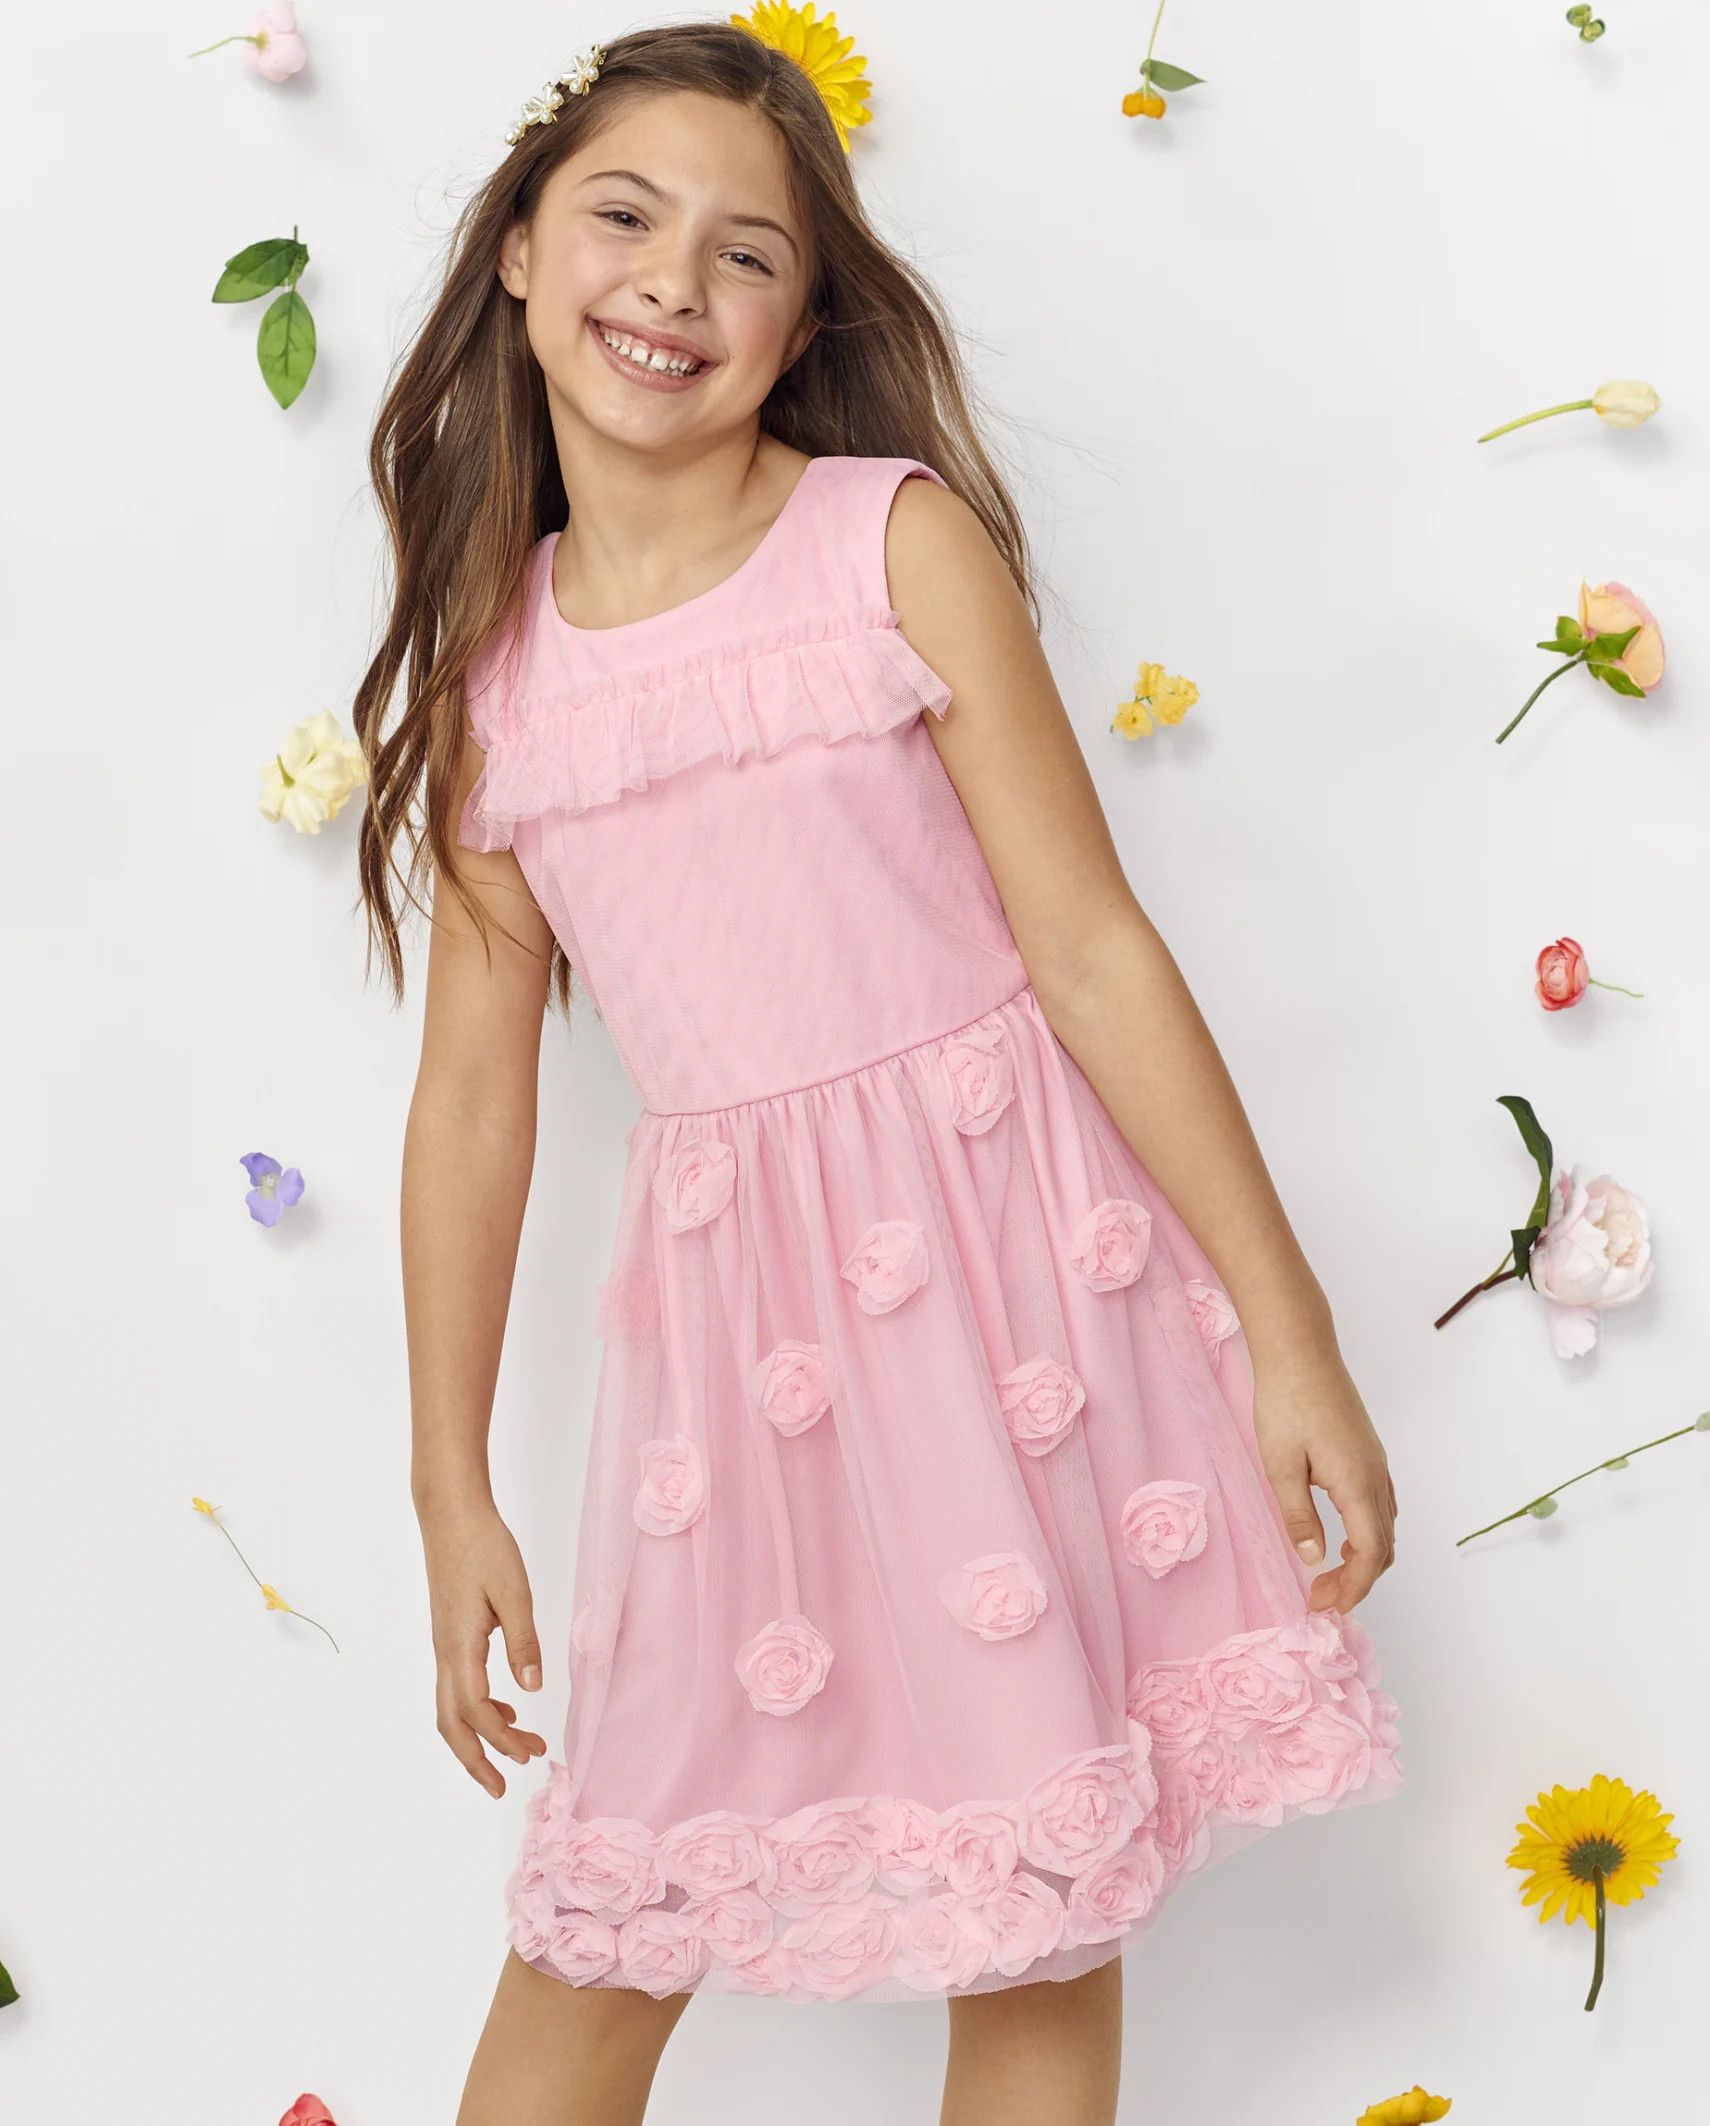 Girls 3D Floral Dress - rose pottery | The Children's Place